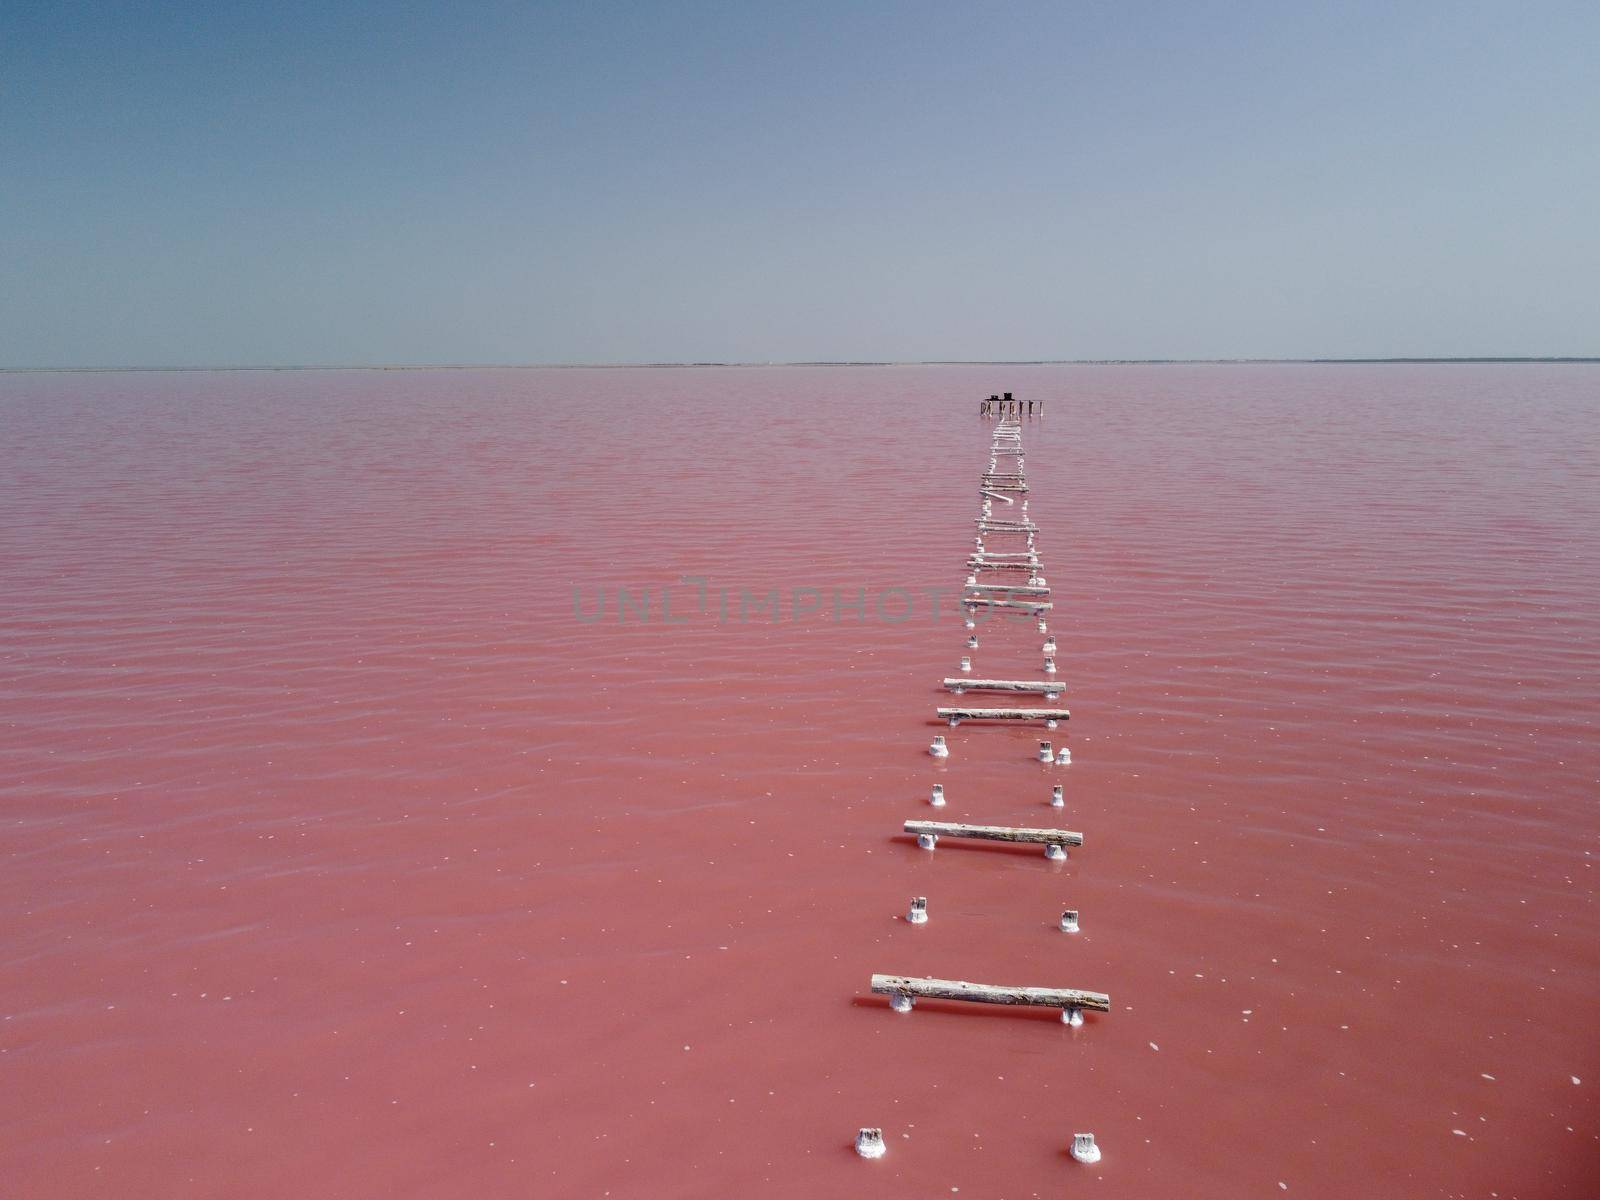 Flying over a pink salt lake. Salt production facilities saline evaporation pond fields in the salty lake. Dunaliella salina impart a red, pink water in mineral lake with dry cristallized salty coast by panophotograph